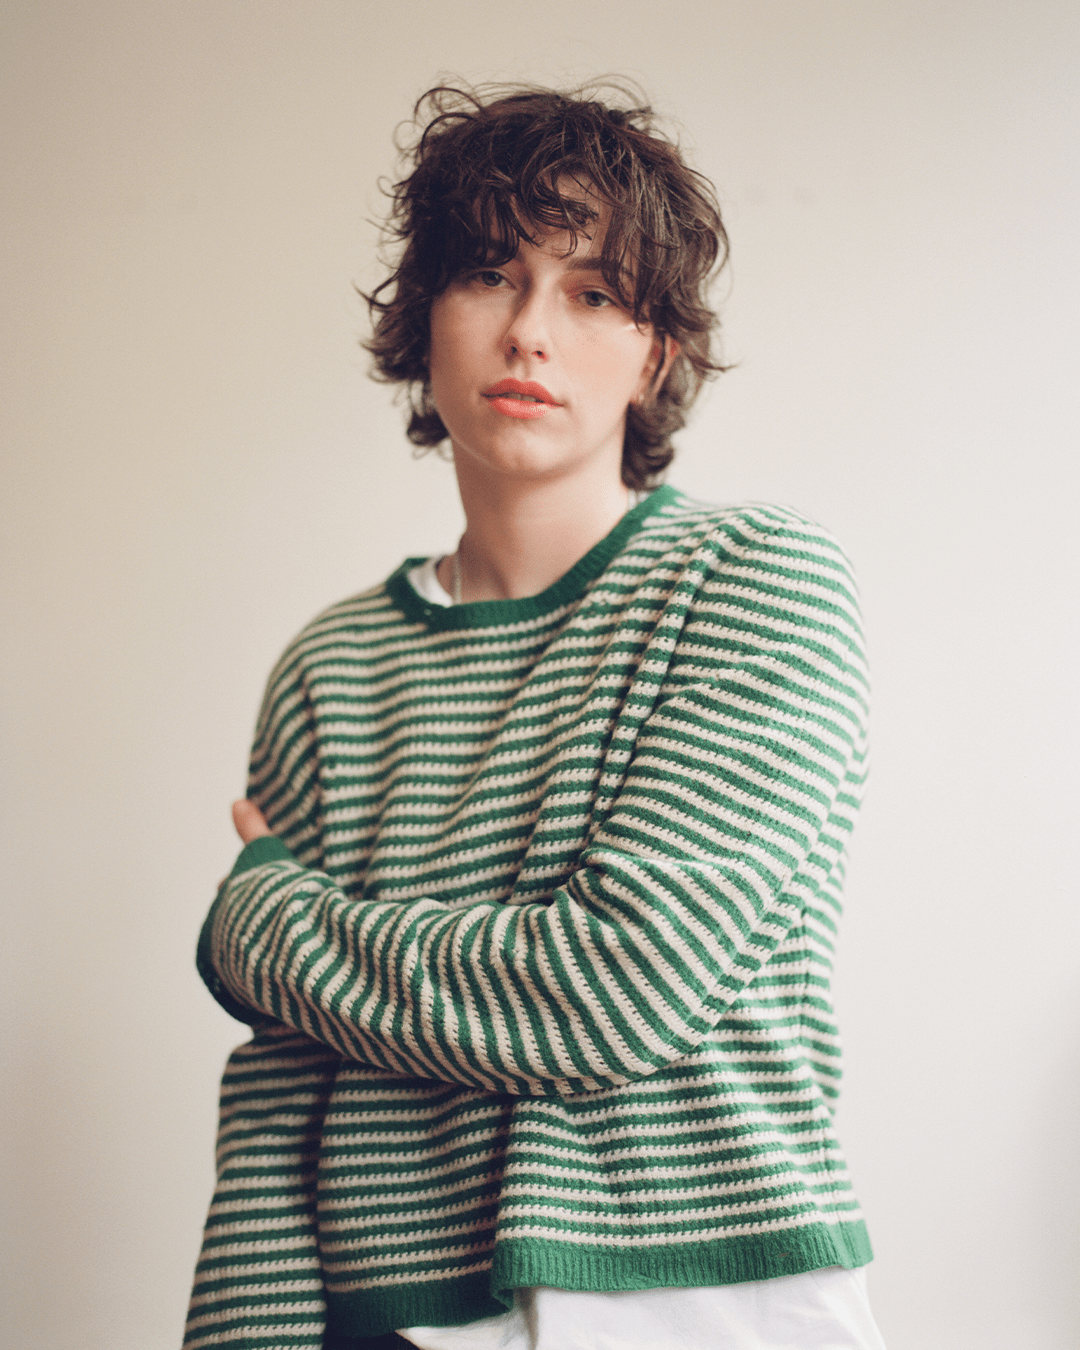 King Princess, aka Mikaela Straus, is staring at the camera with a soft but serious expression. They're wearing a green and white striped sweater, standing with one arm wrapped around their stomach. . 